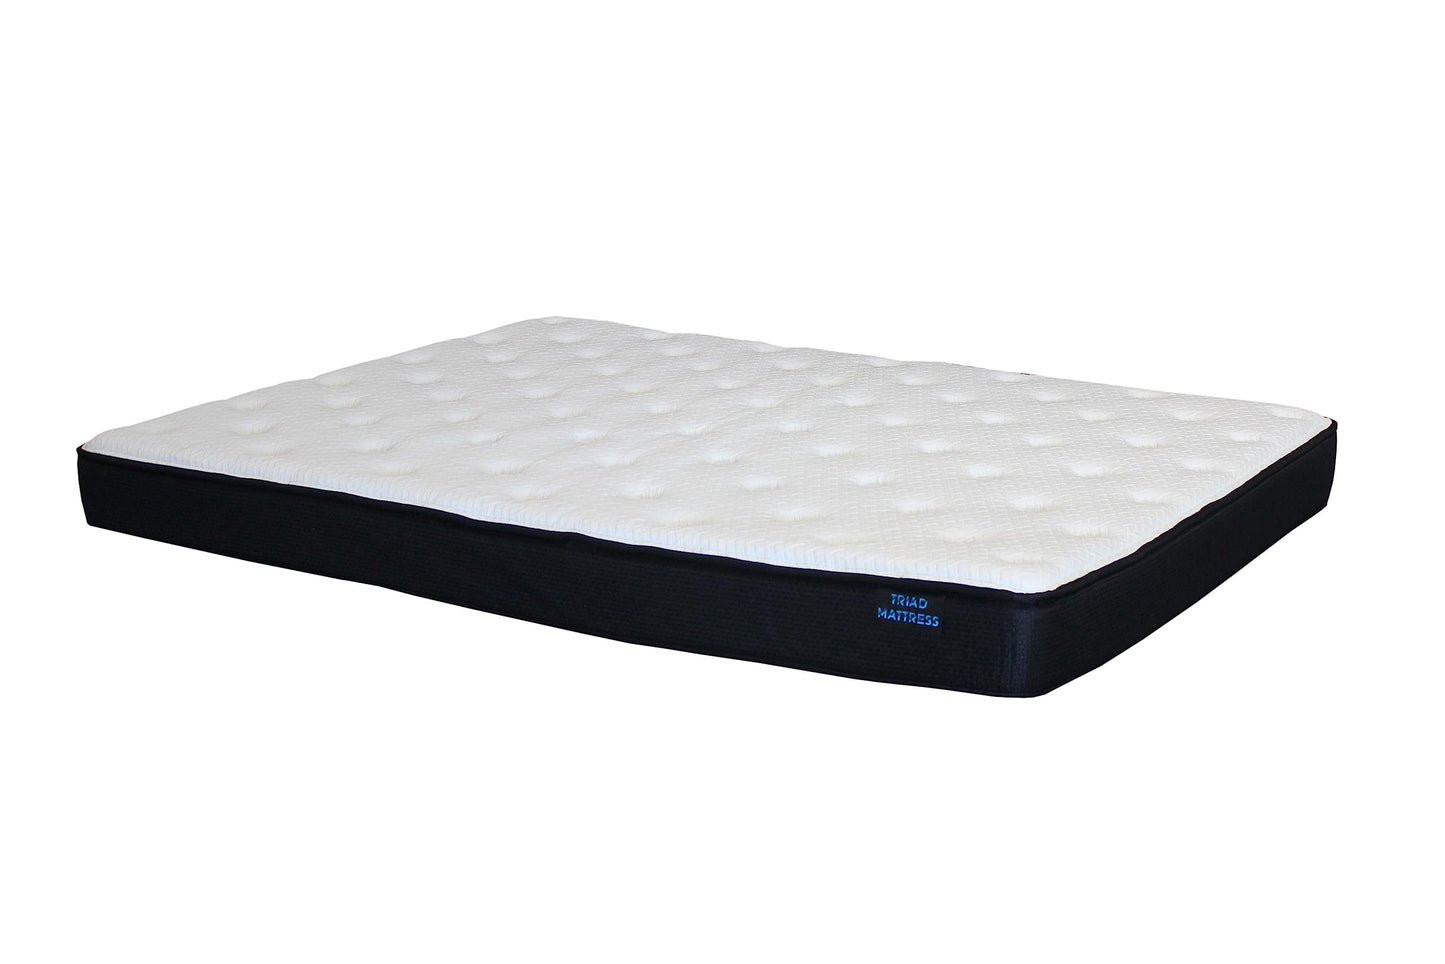 Triad Lite 6 inch RV Mattress Cool Gel Foam, Glacier Cooling Stretch Cover, Firm Support, Made in The USA (66x80)